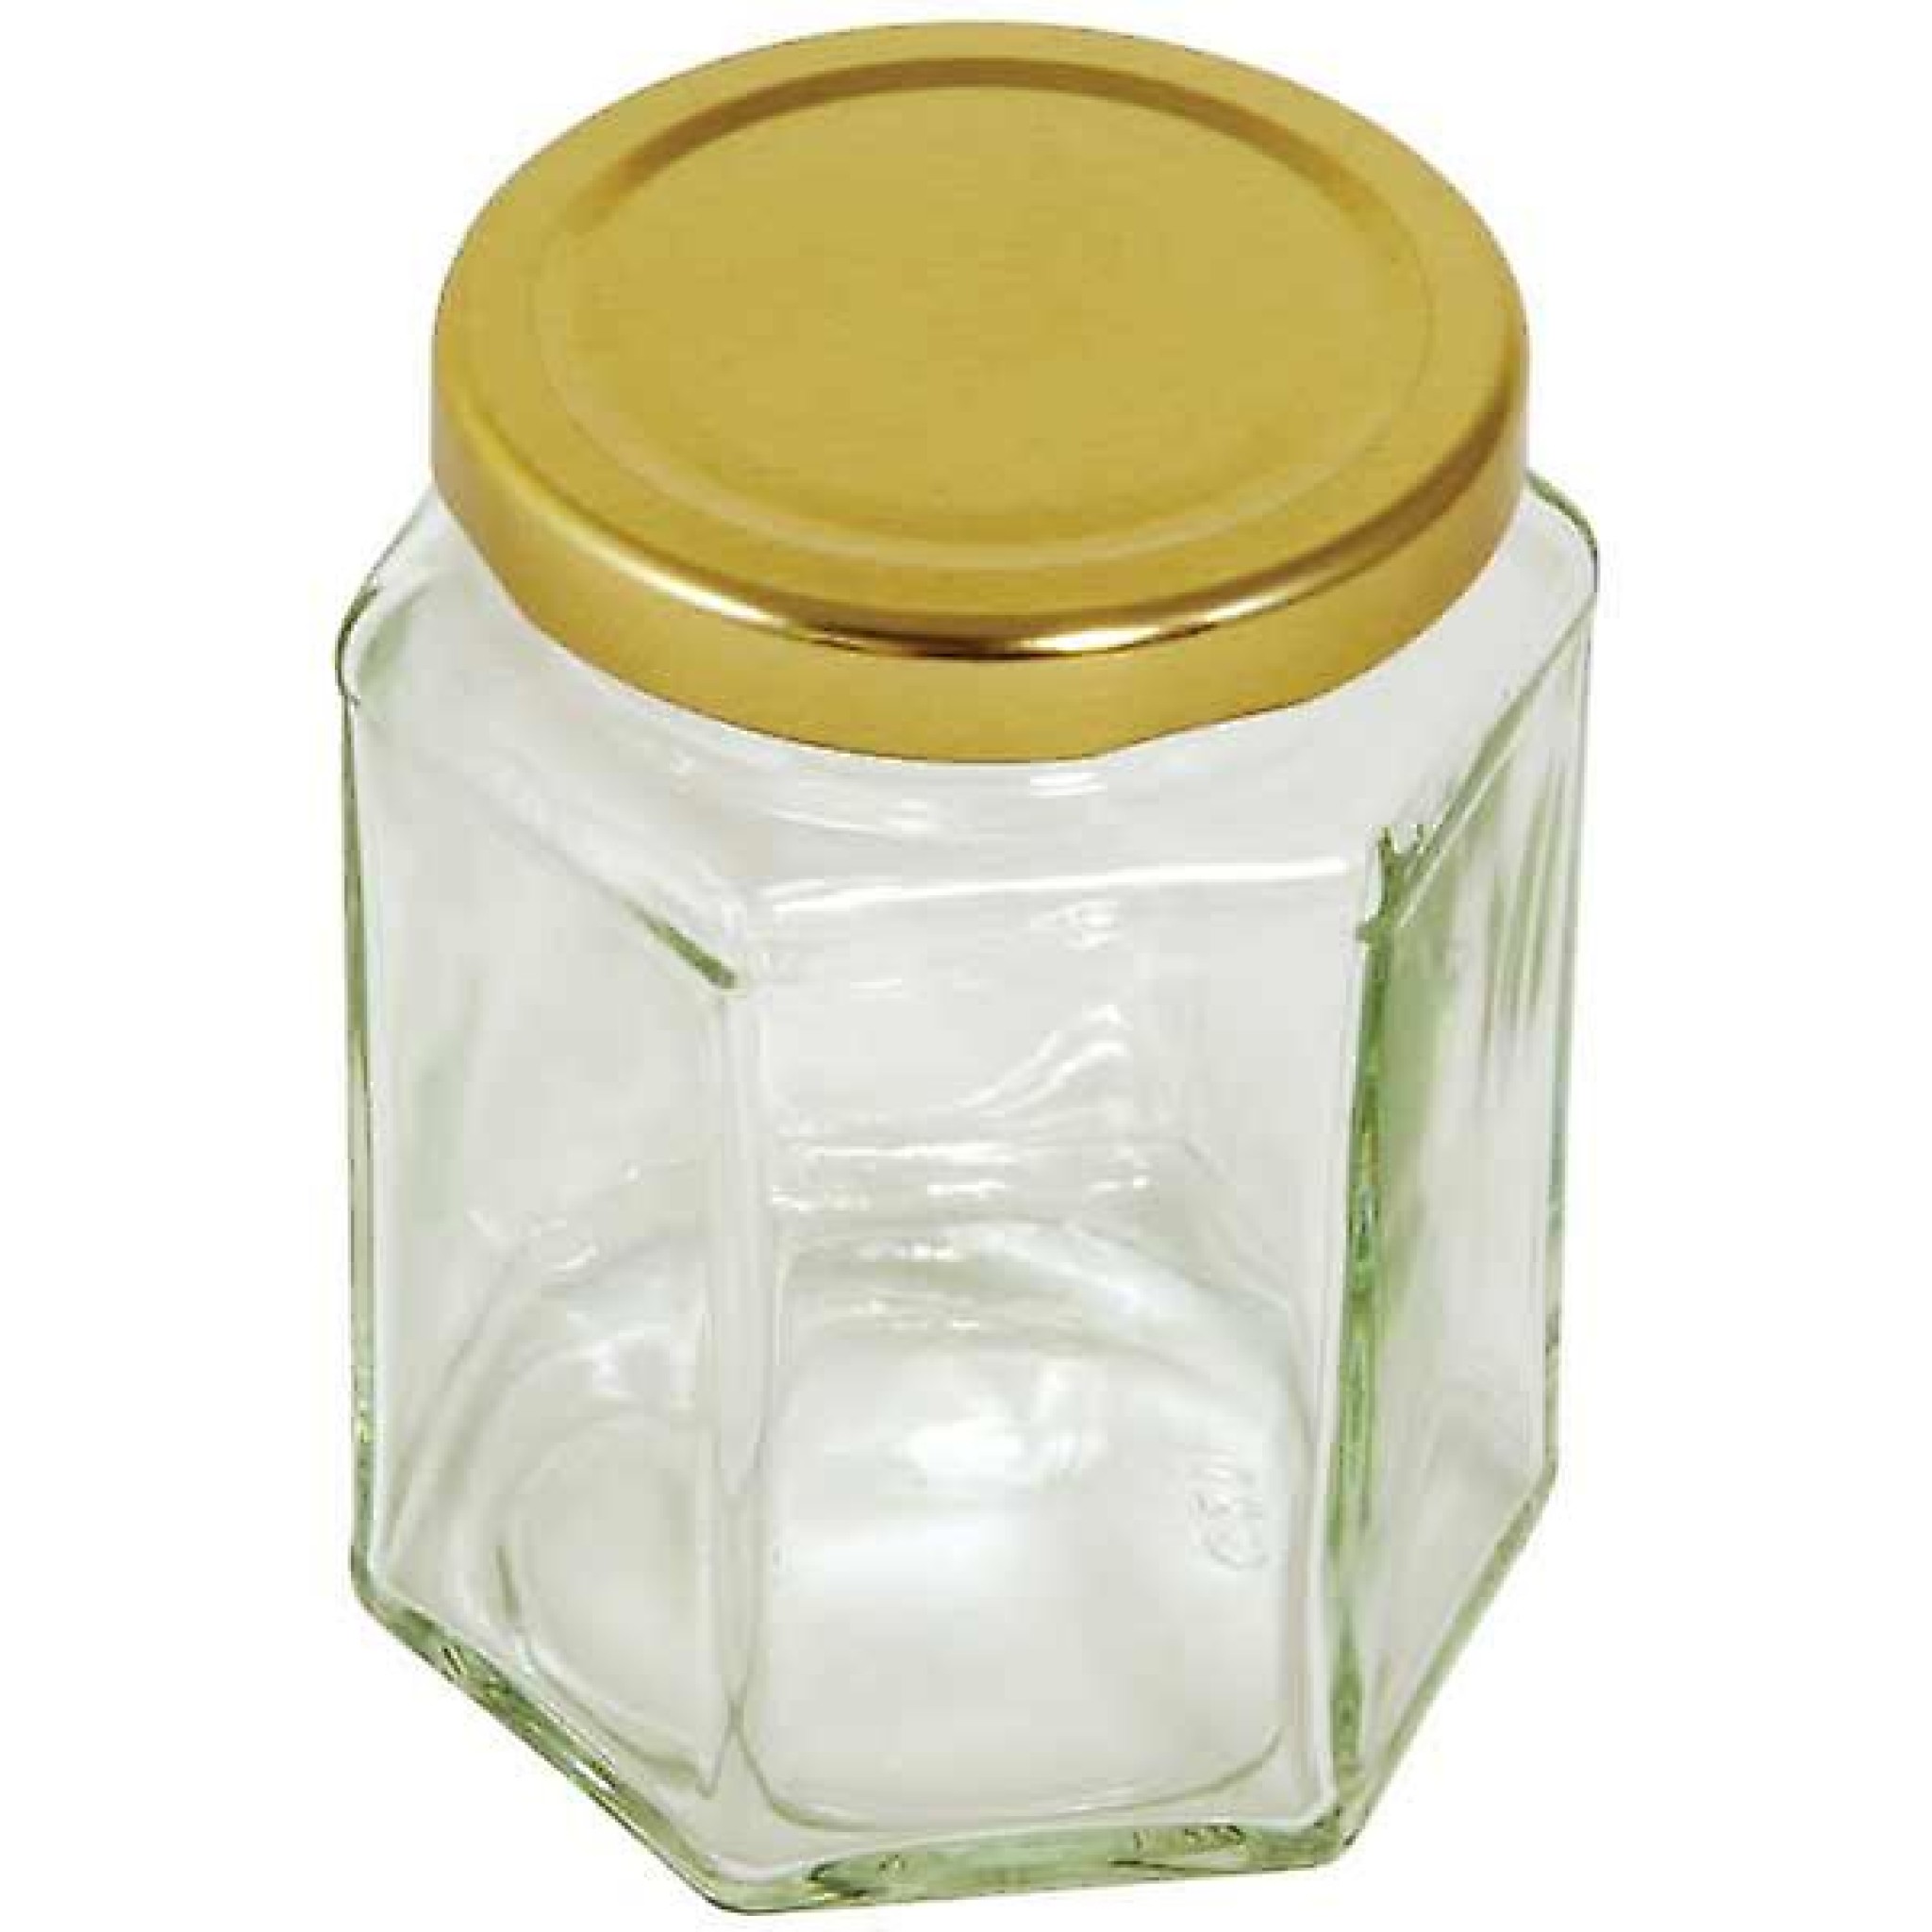 8oz-hex.-box-of-72-jars-and-lids-from-30p-each-collection-only-574-p.jpg